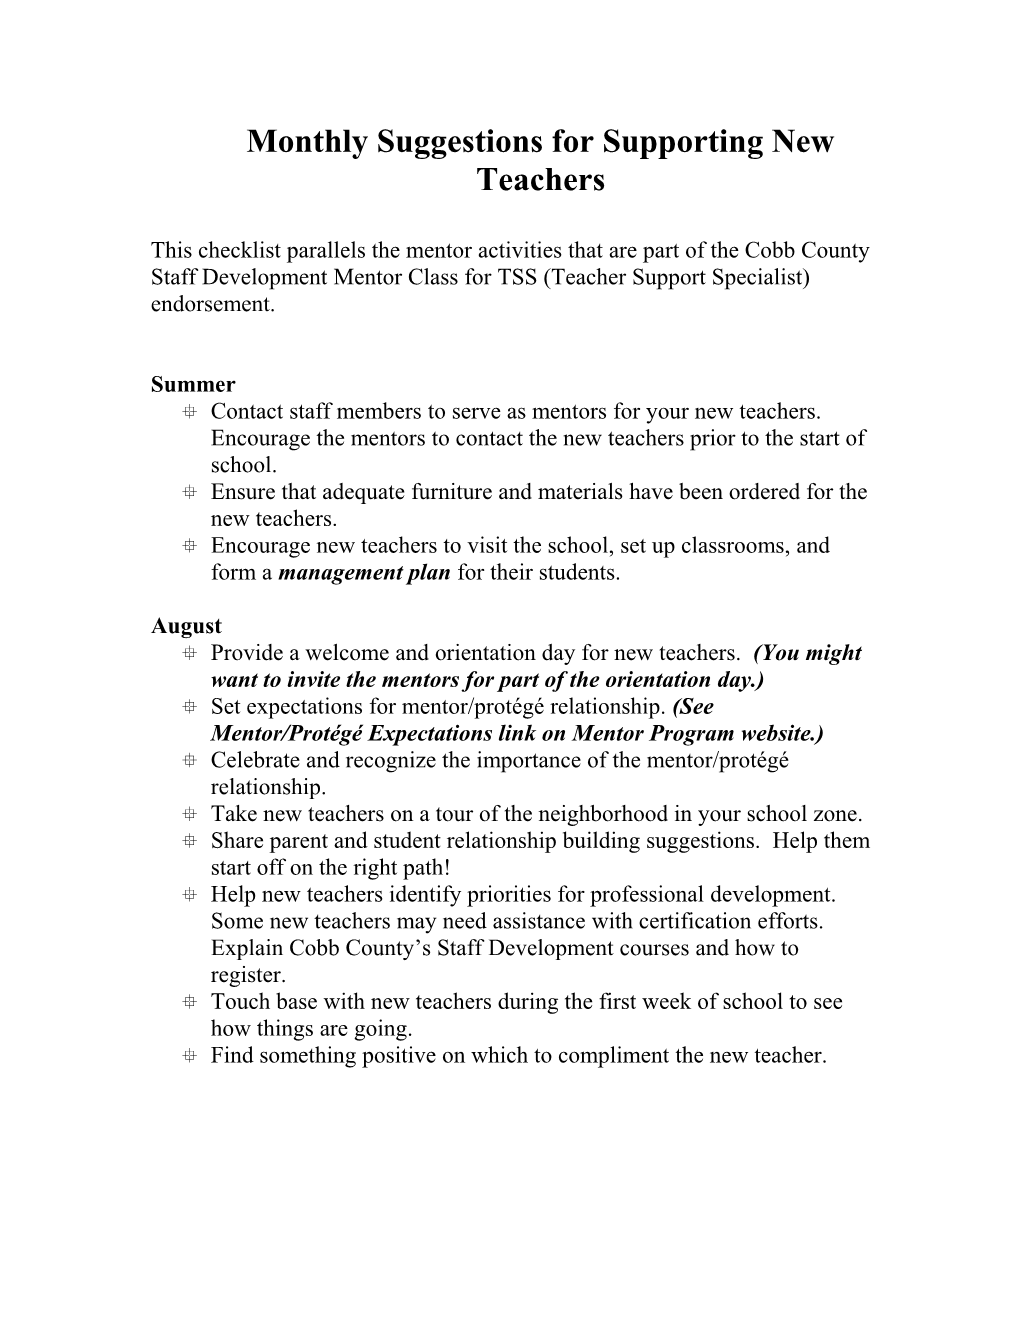 Monthly Suggestions for Supporting New Teachers